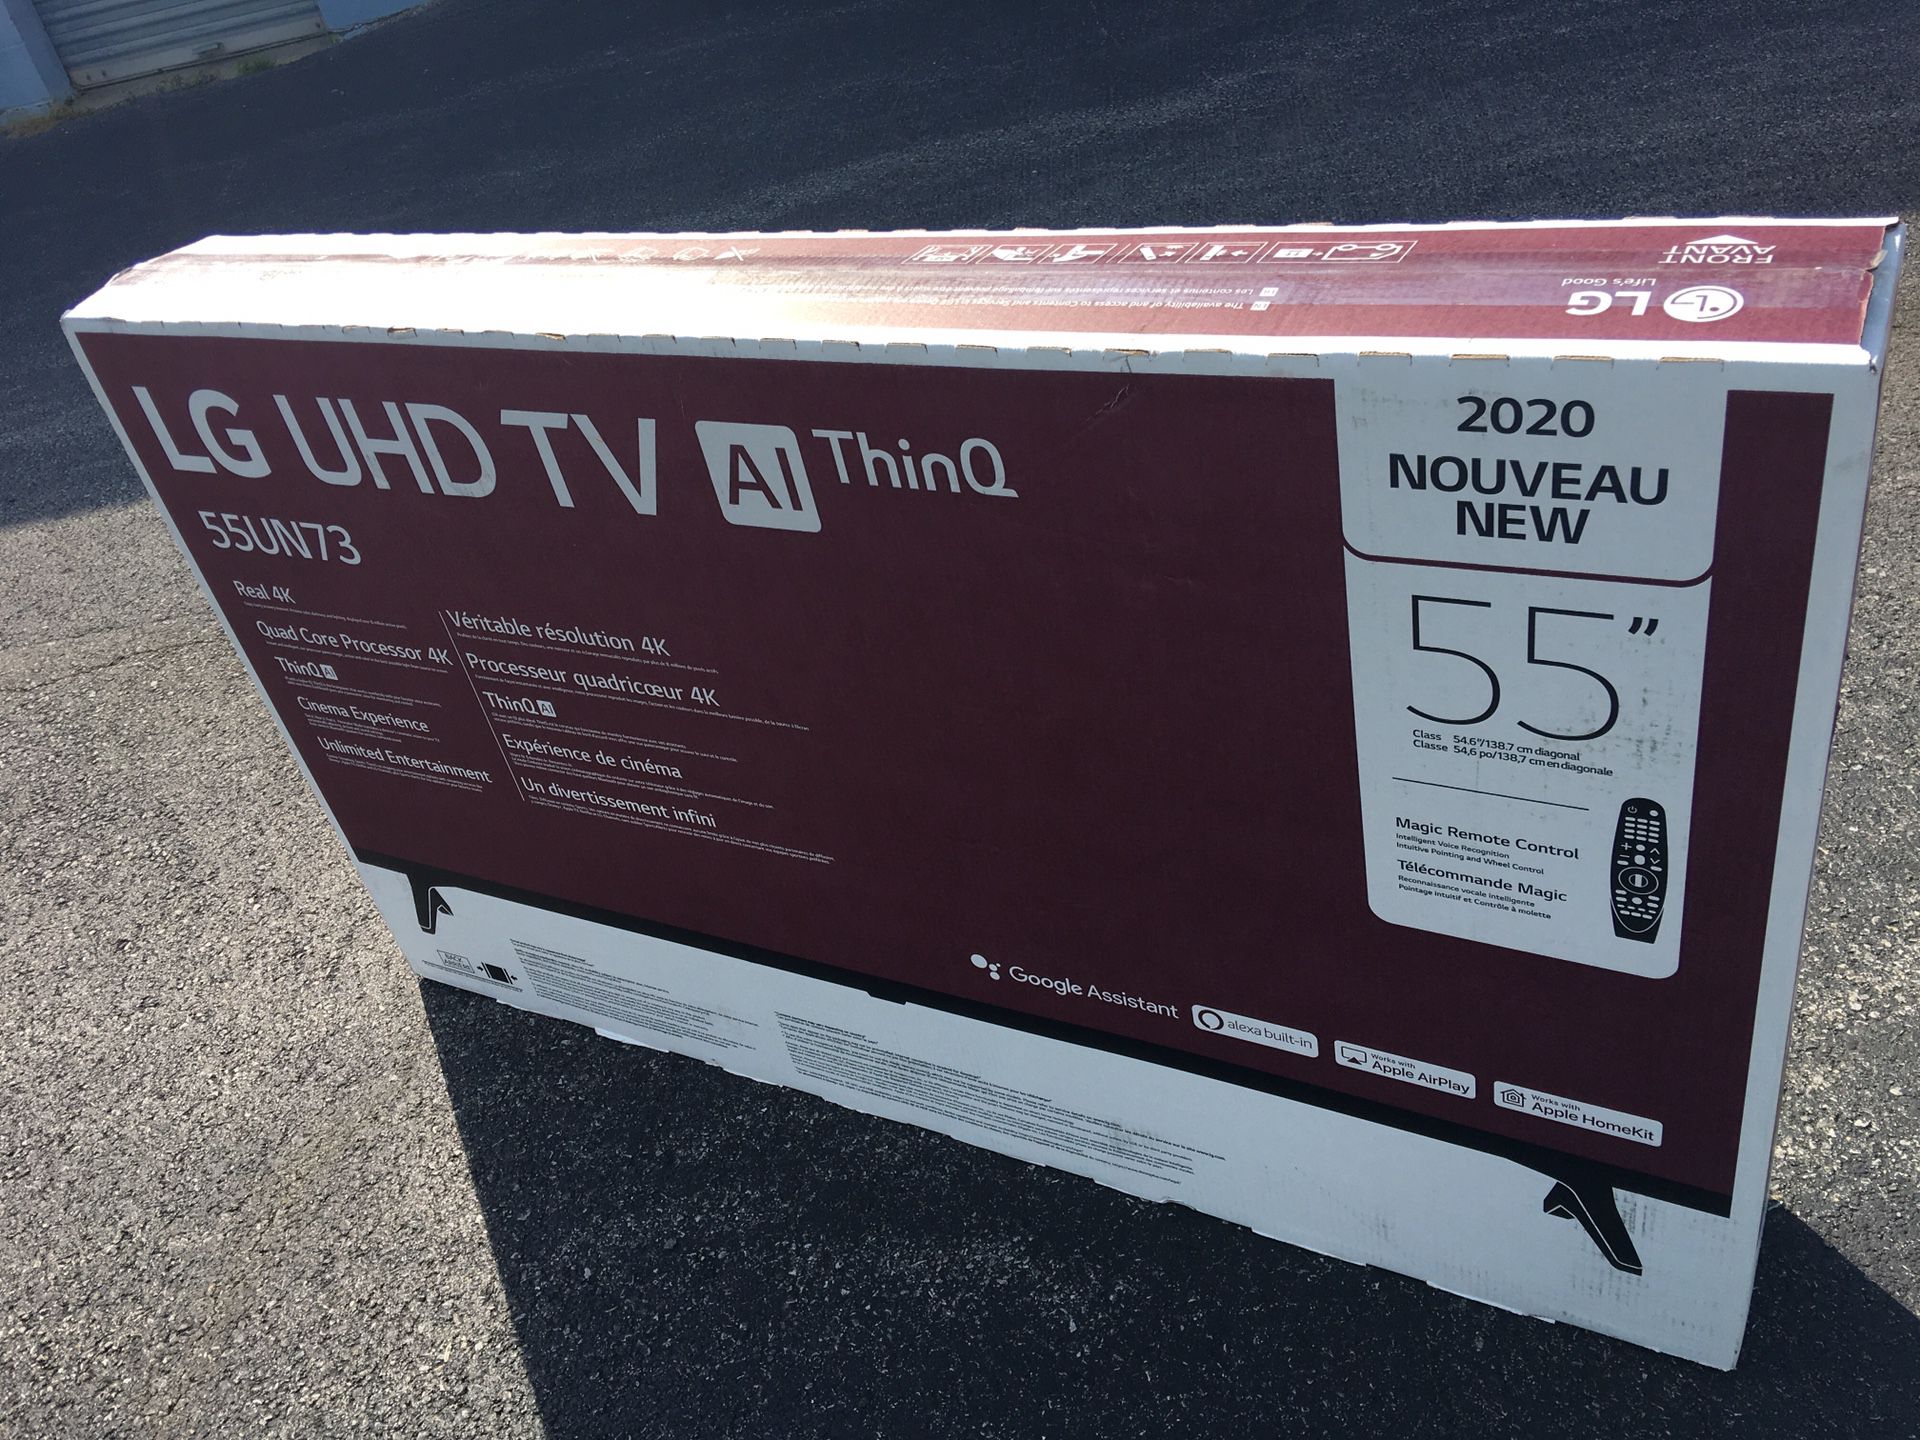 Brand new LG TV 55 inches for sale